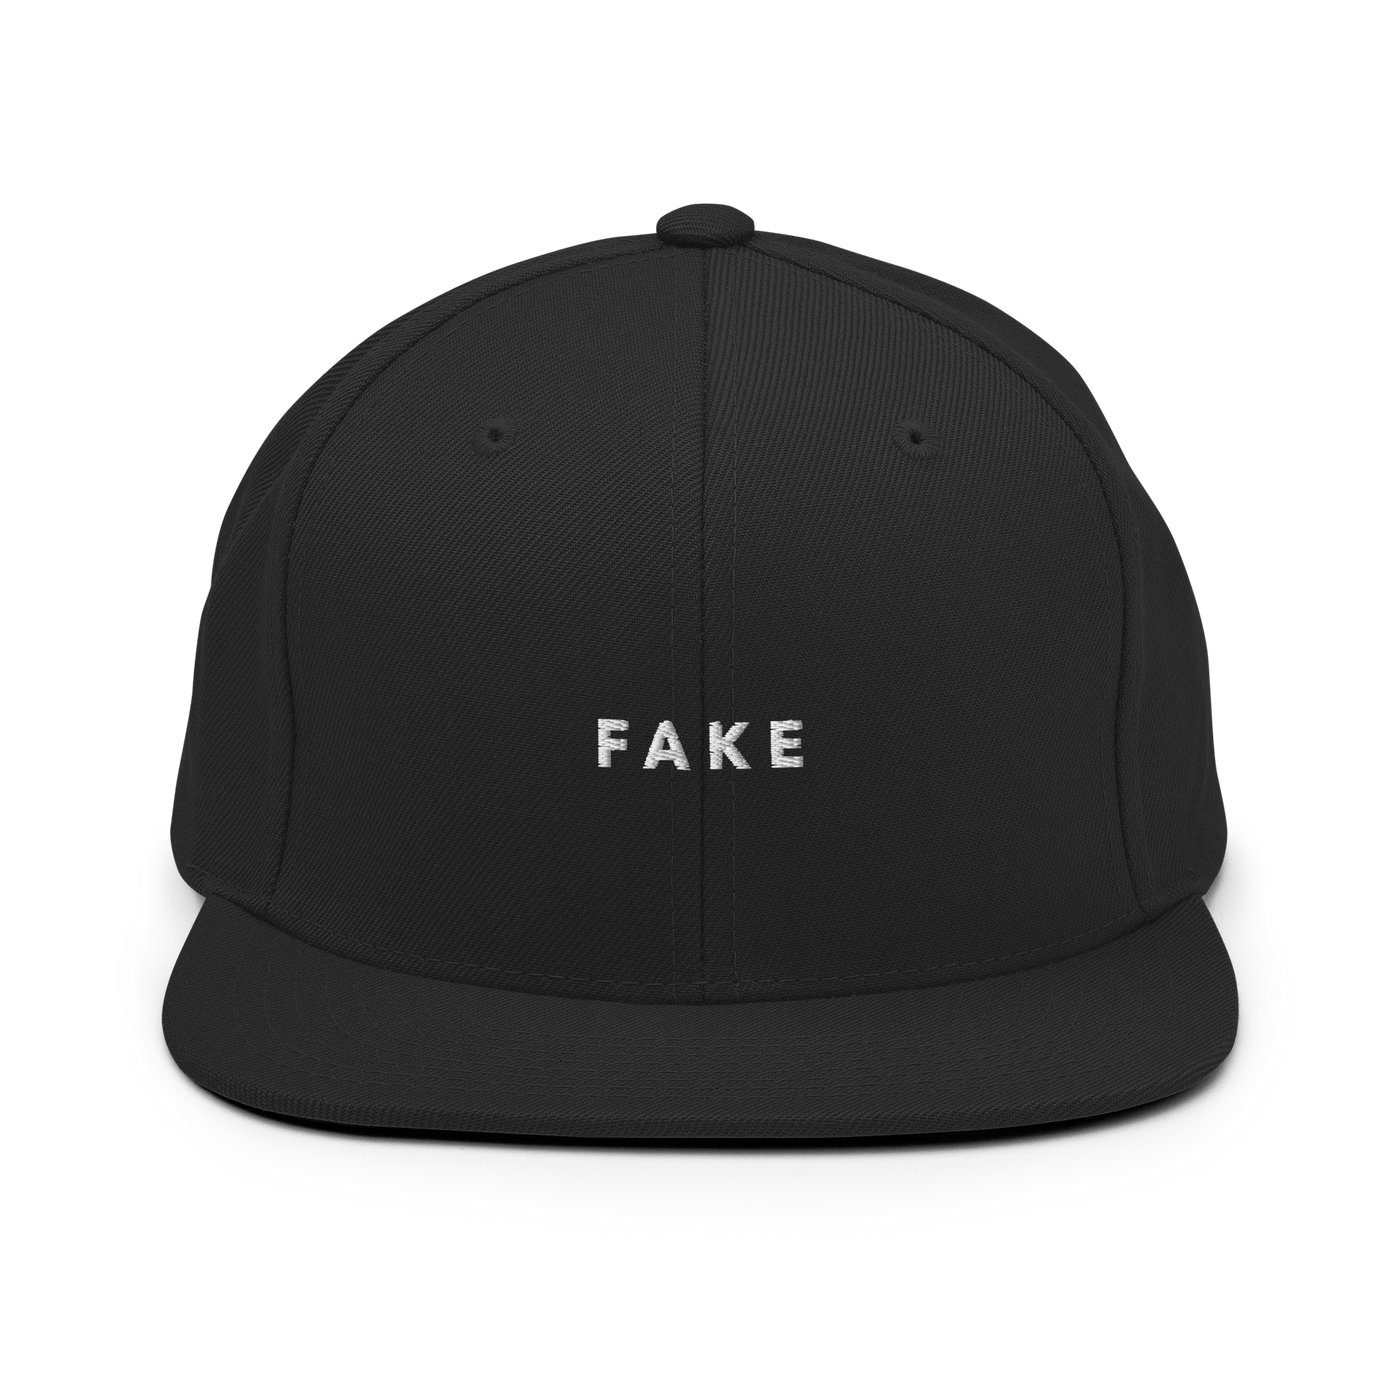 FAKE Snapback Hat - Black - - Just Another Cap Store